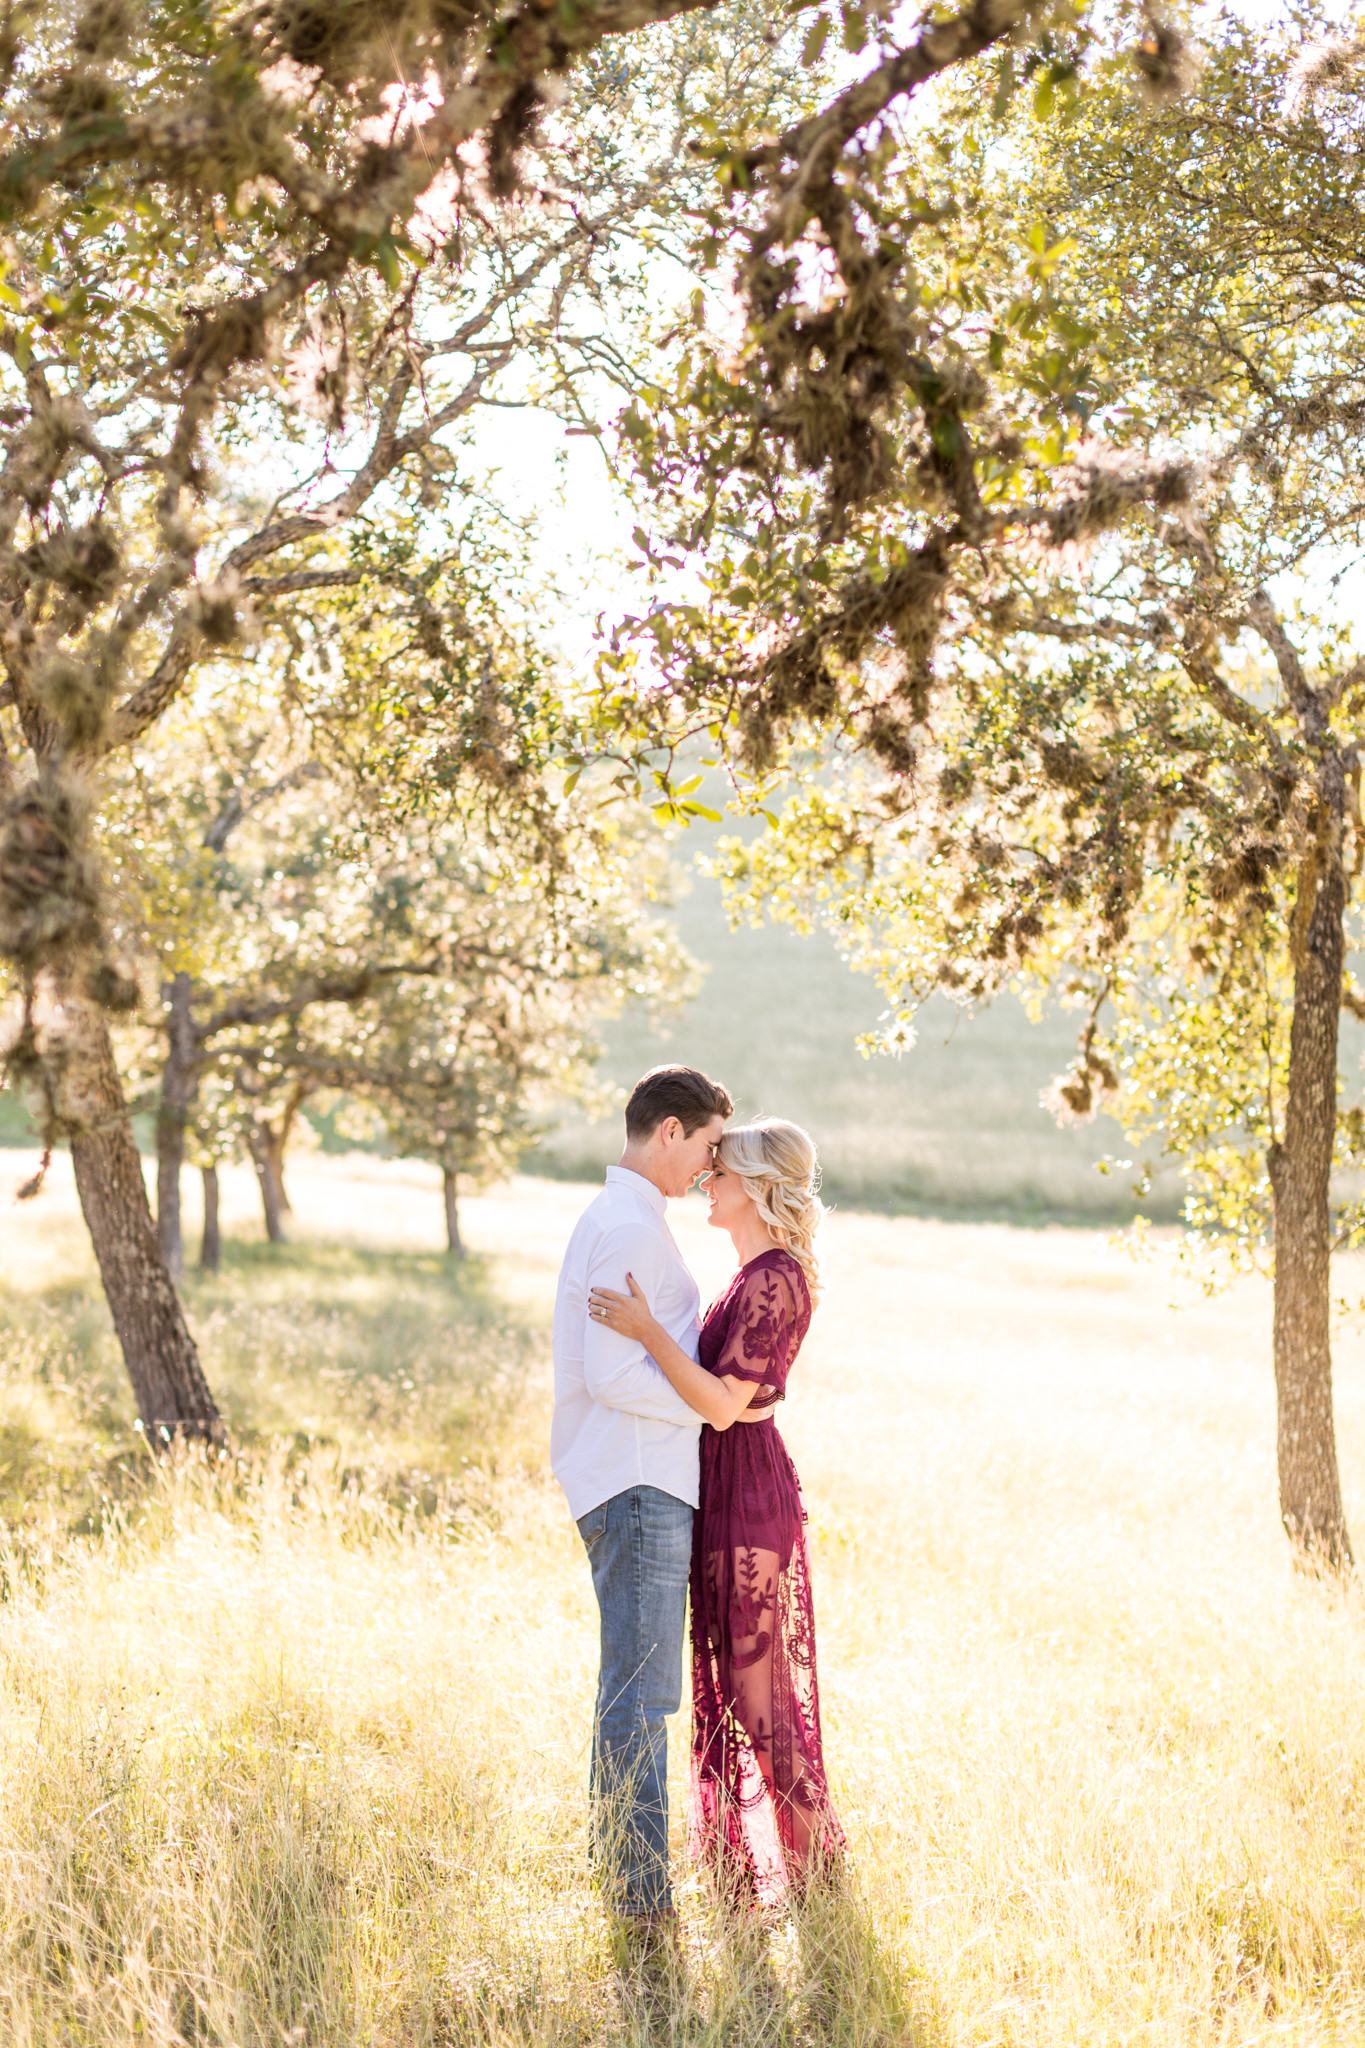 An Engagement Session at Overlook Park in Canyon Lake, TX by Dawn Elizabeth Studios, San Antonio Wedding Photographer, Texas Wedding Photographer